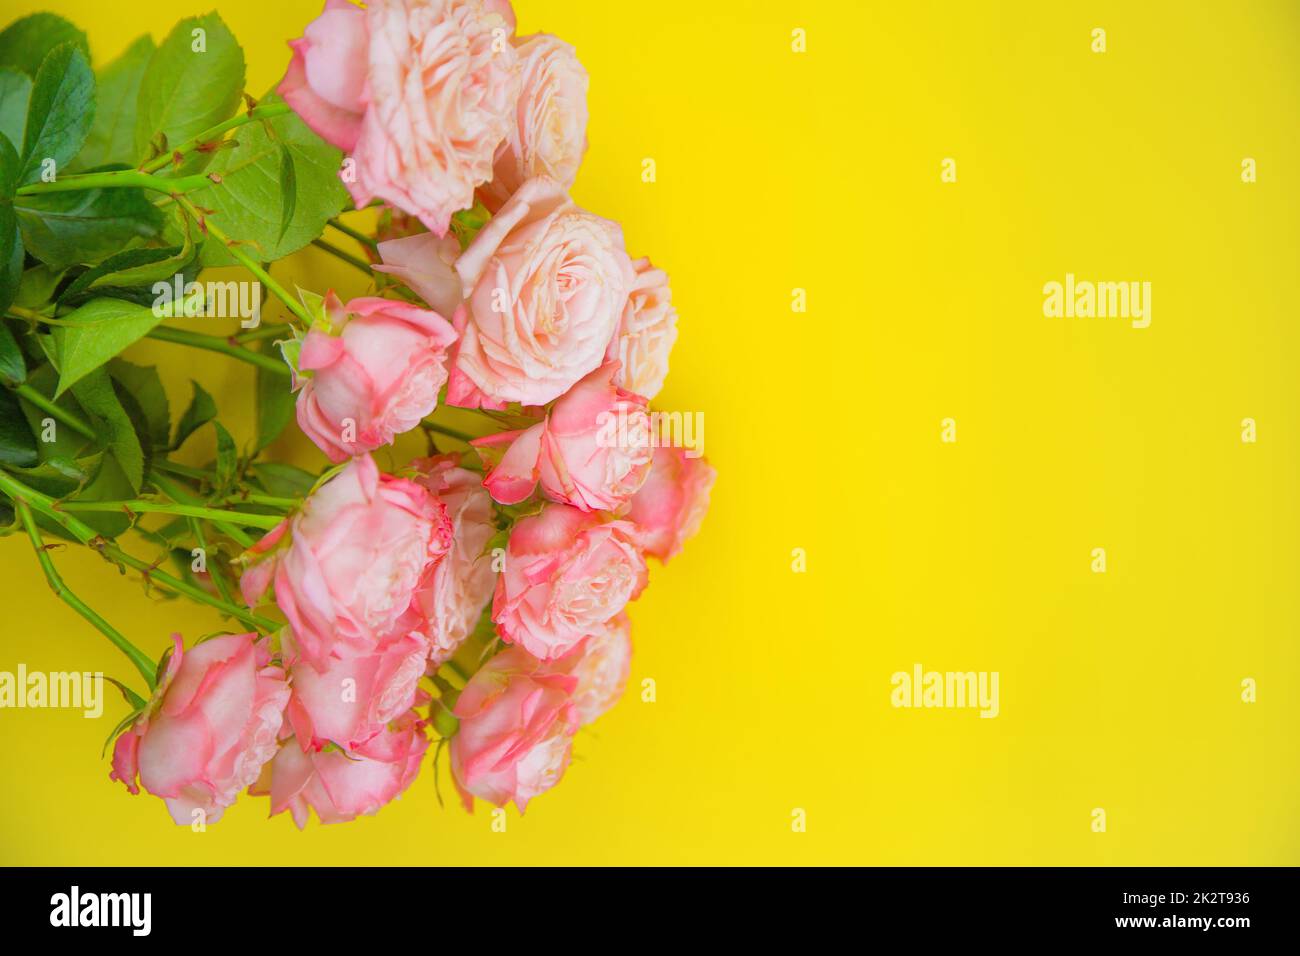 A large bouquet of pink roses lies on a yellow background with a place for text Stock Photo